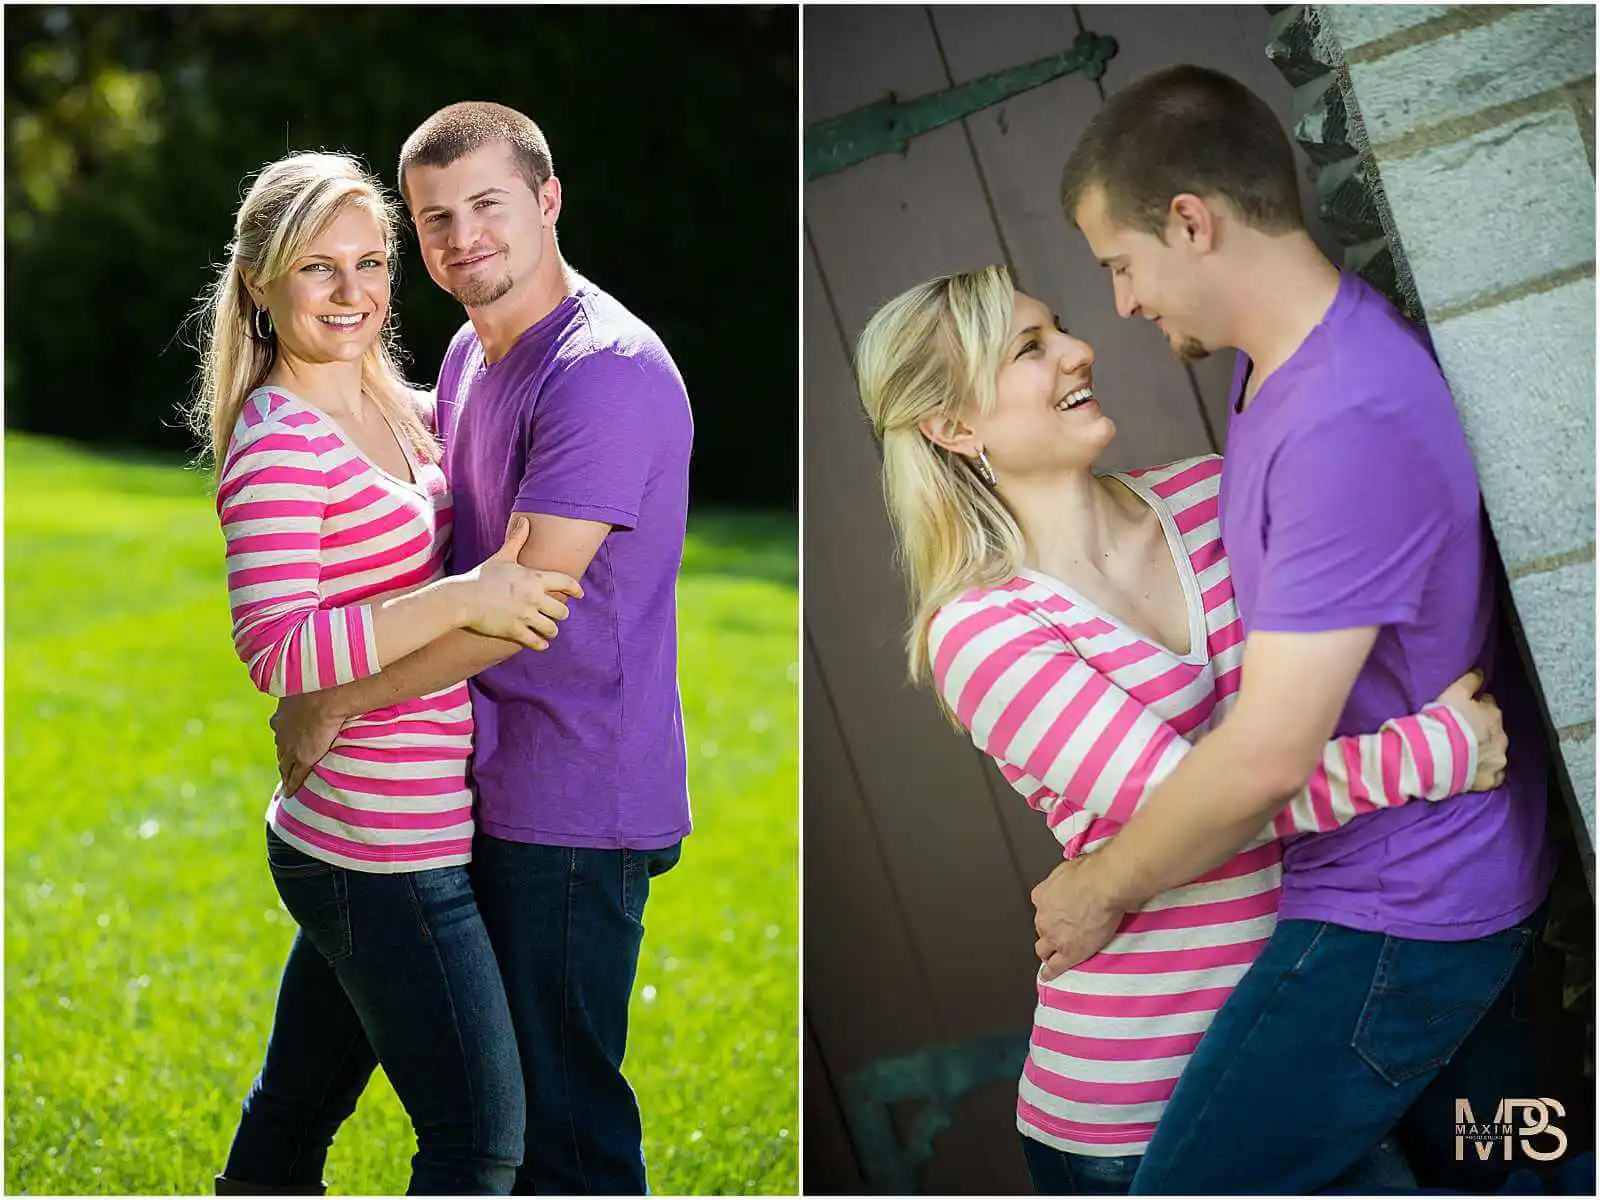 Smiling couple embracing in outdoor photoshoot.